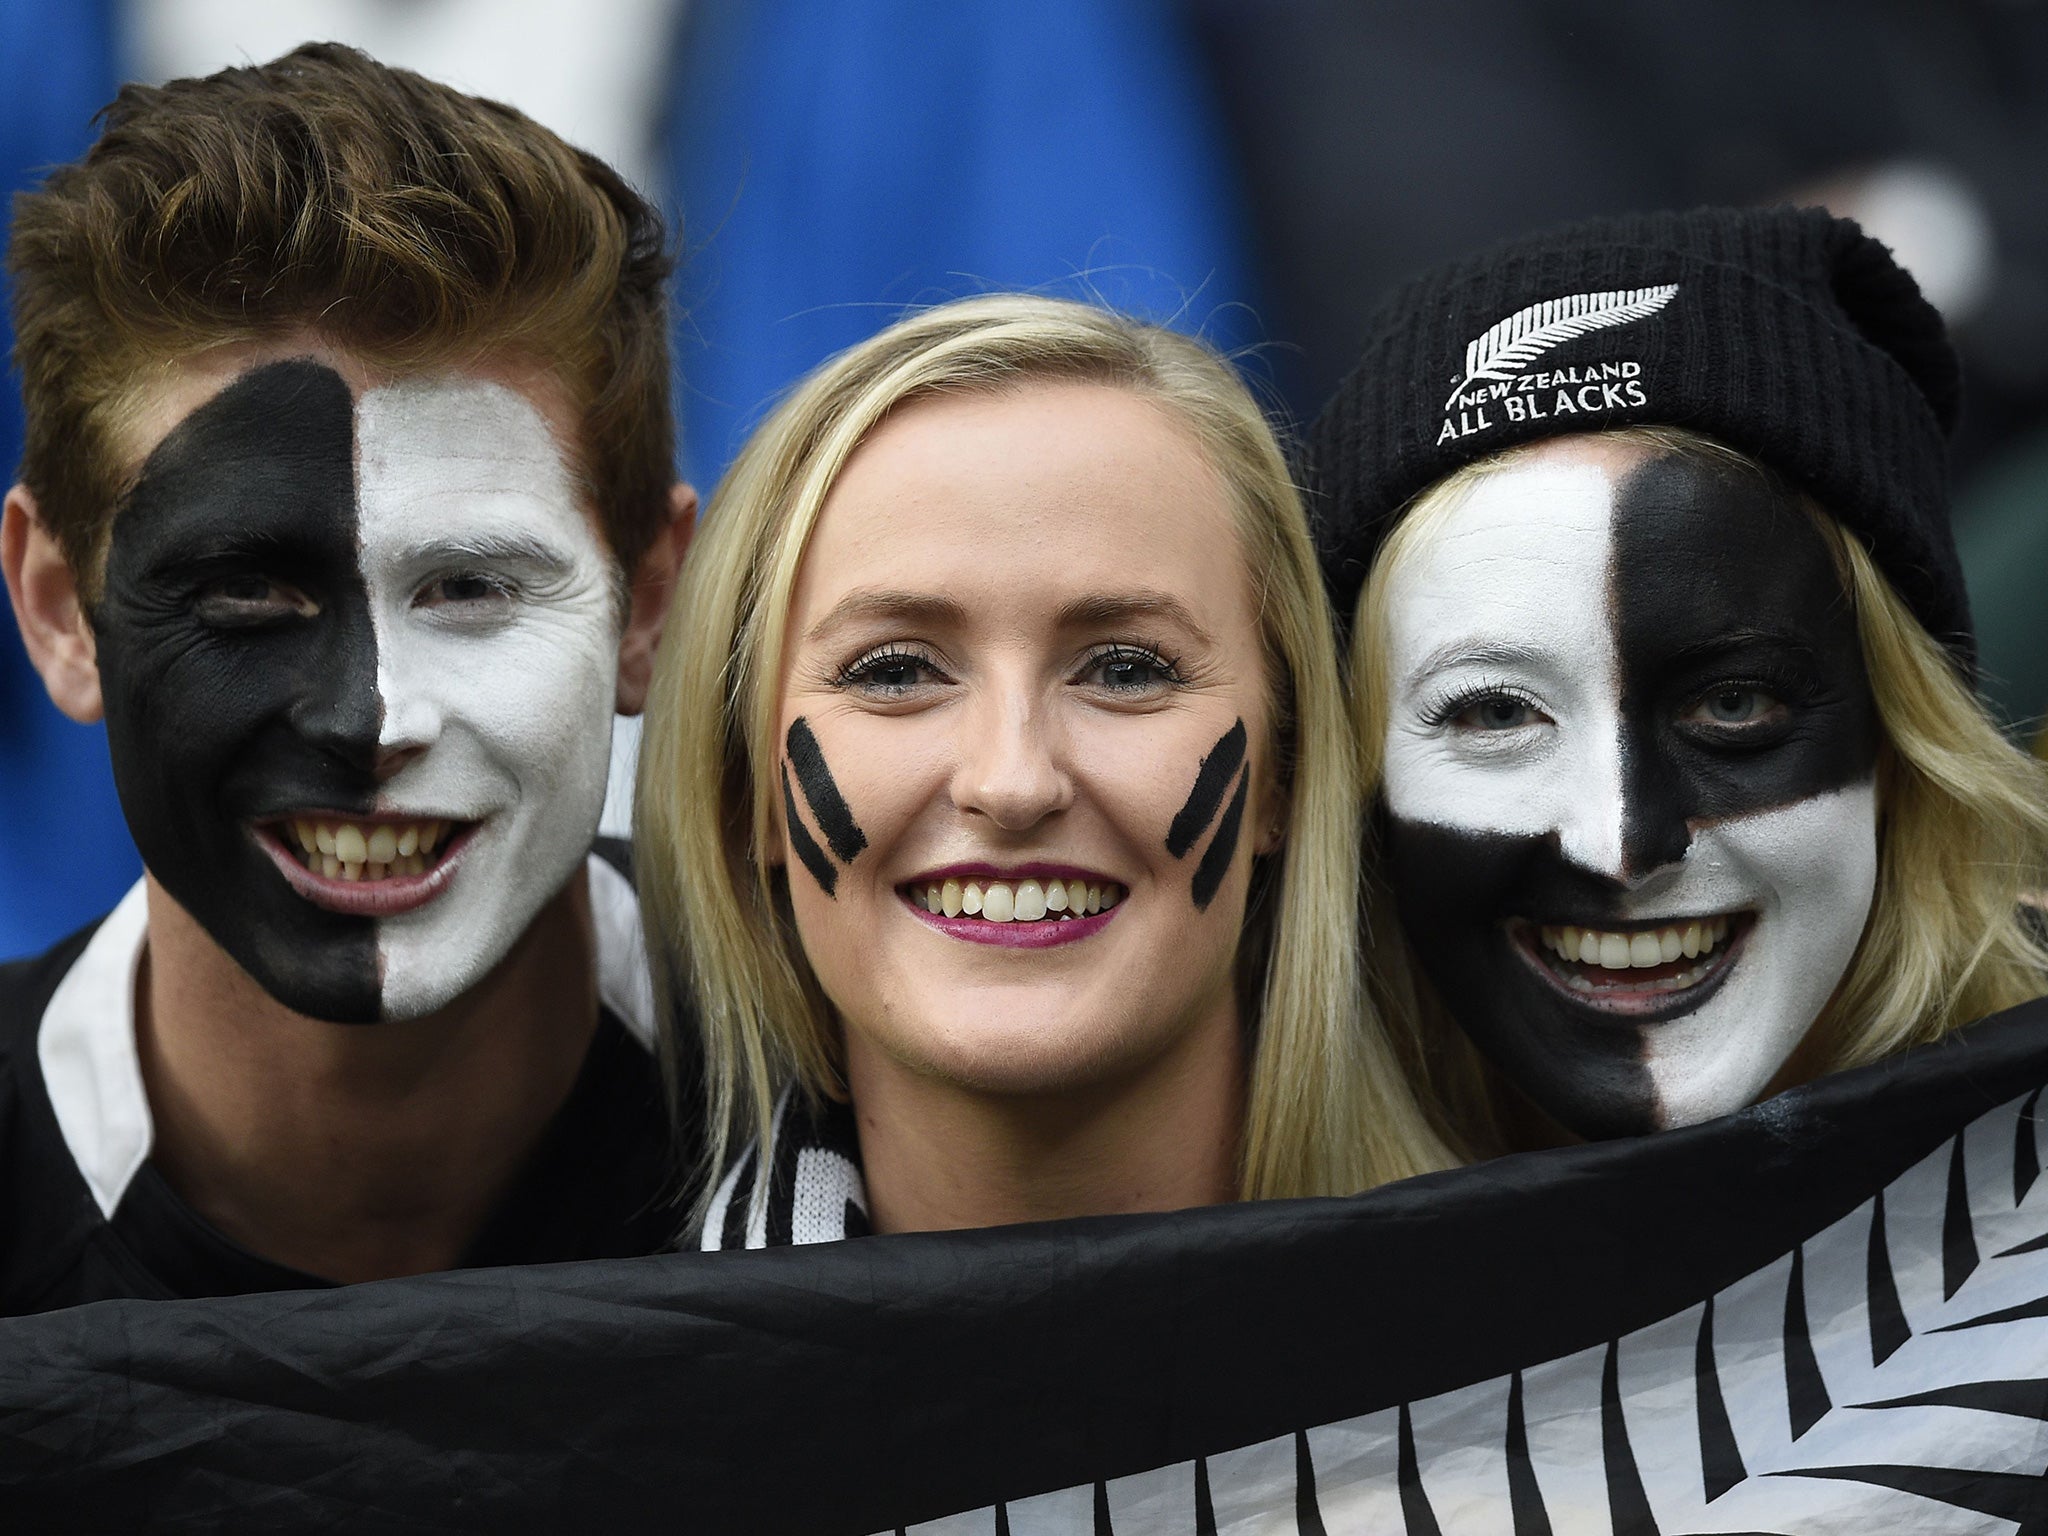 New Zealand fans pose prior to the semi-final against South Africa